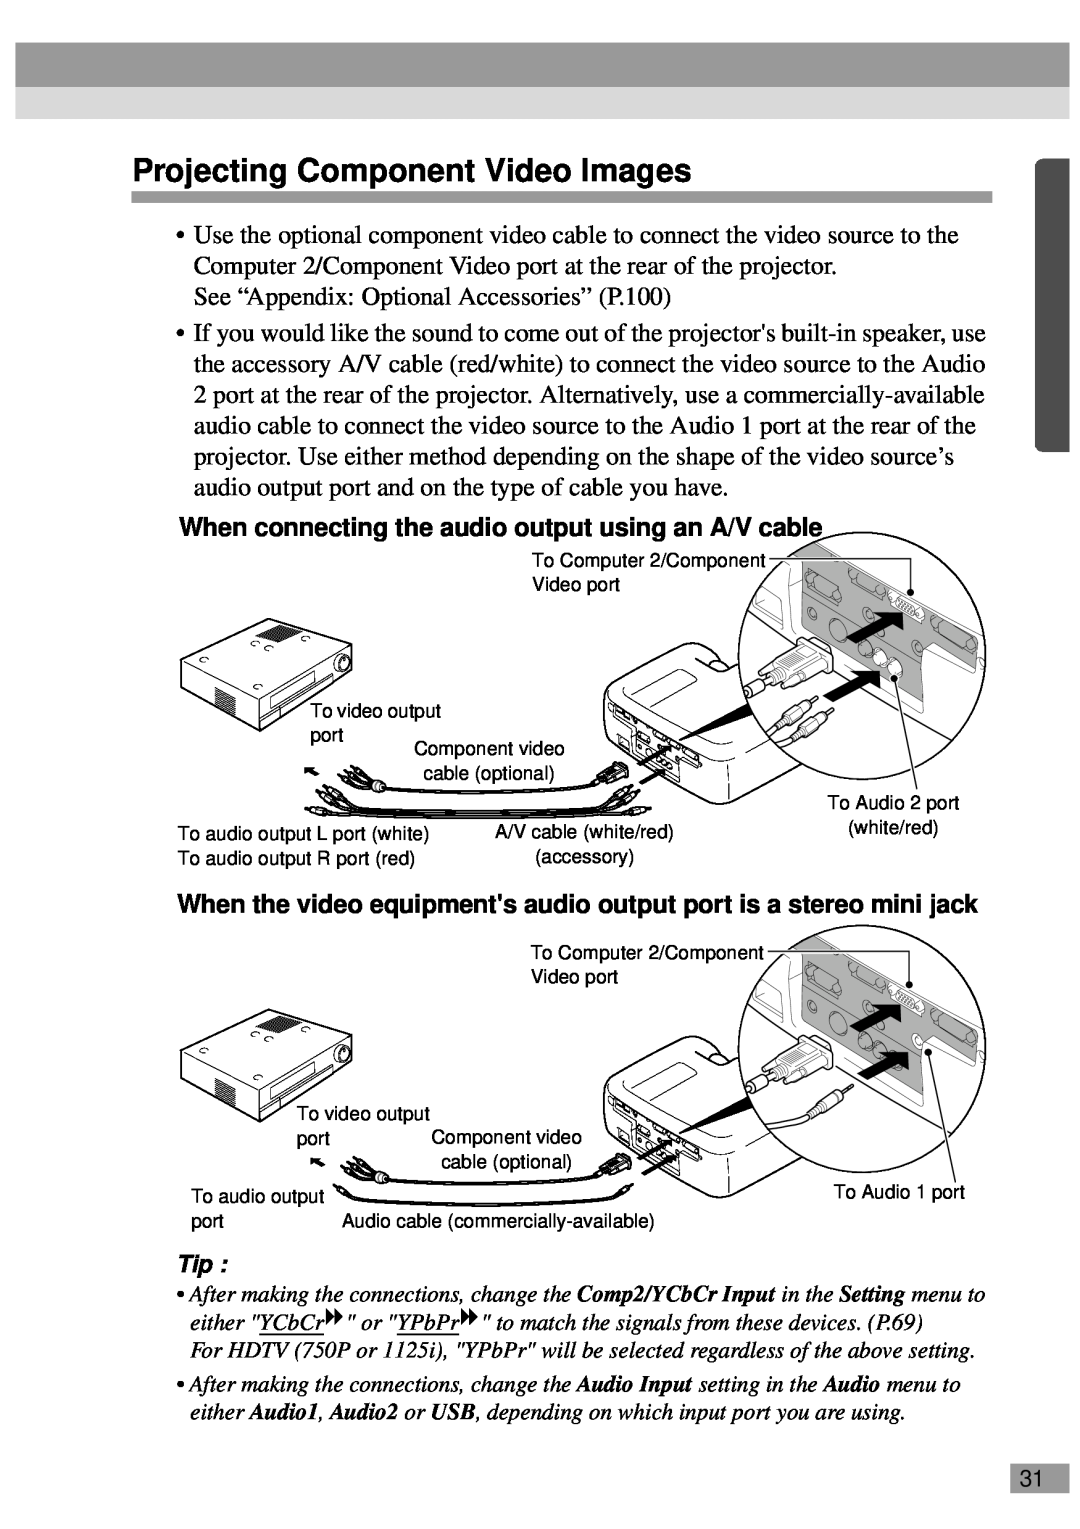 Epson EMP-811, ELP-811, ELP-600 manual Projecting Component Video Images, When connecting the audio output using an A/V cable 